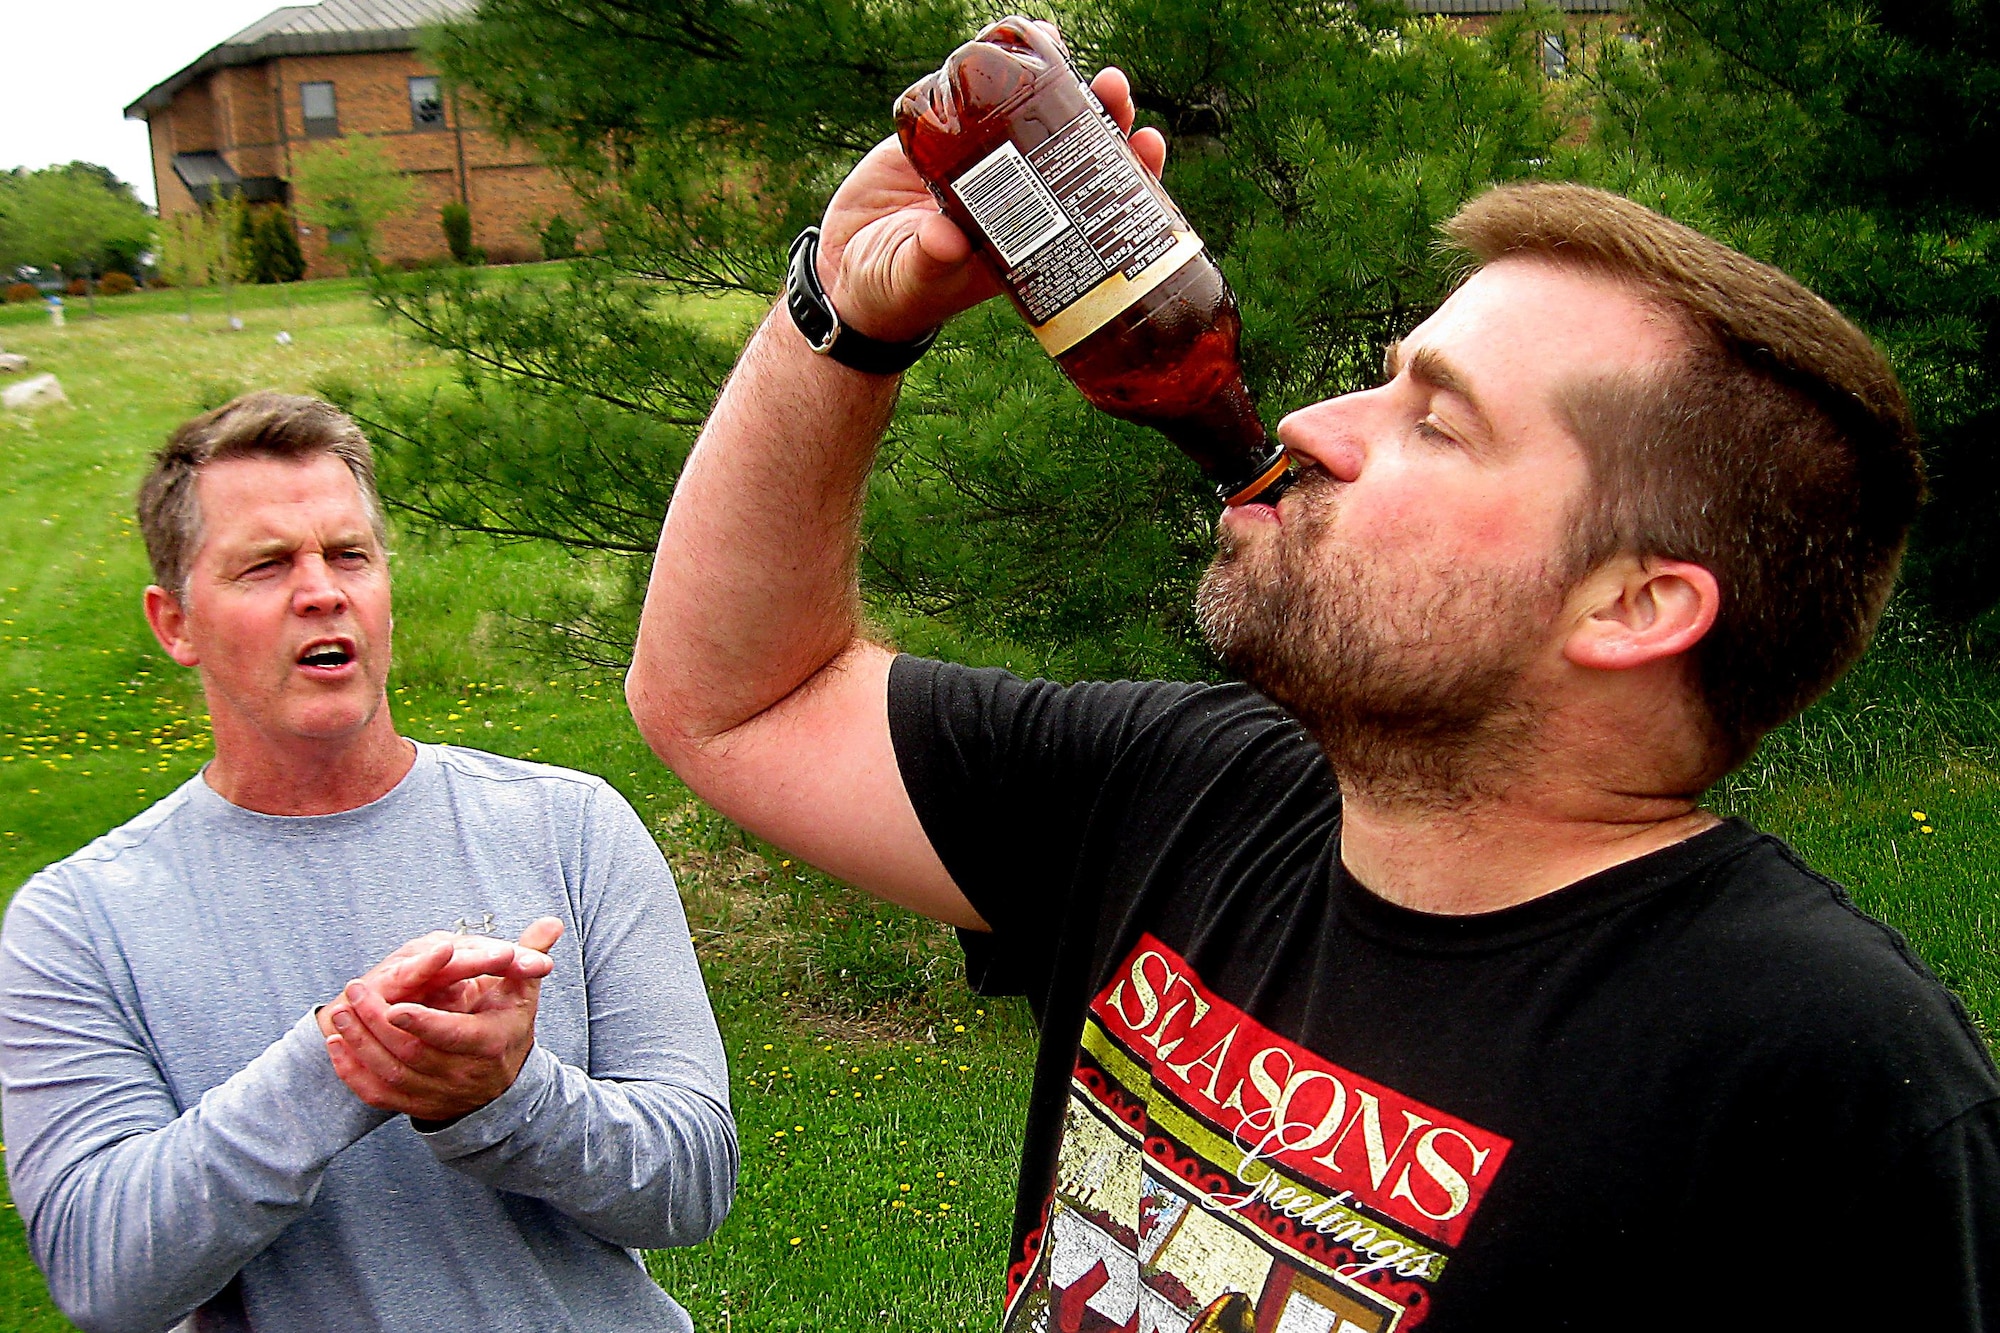 Zachery Holmes, 434th Force Support Squadron, finishes drinking a root beer during the 2016 Plastic Egg Run April 27, 2016 at Grissom Air Reserve Base, Ind. Drinking the entire bottle was the challenge that his team had to complete at one of the stops before continuing the run. (U.S. Air Force photo/Senior Airman Dakota Bergl)